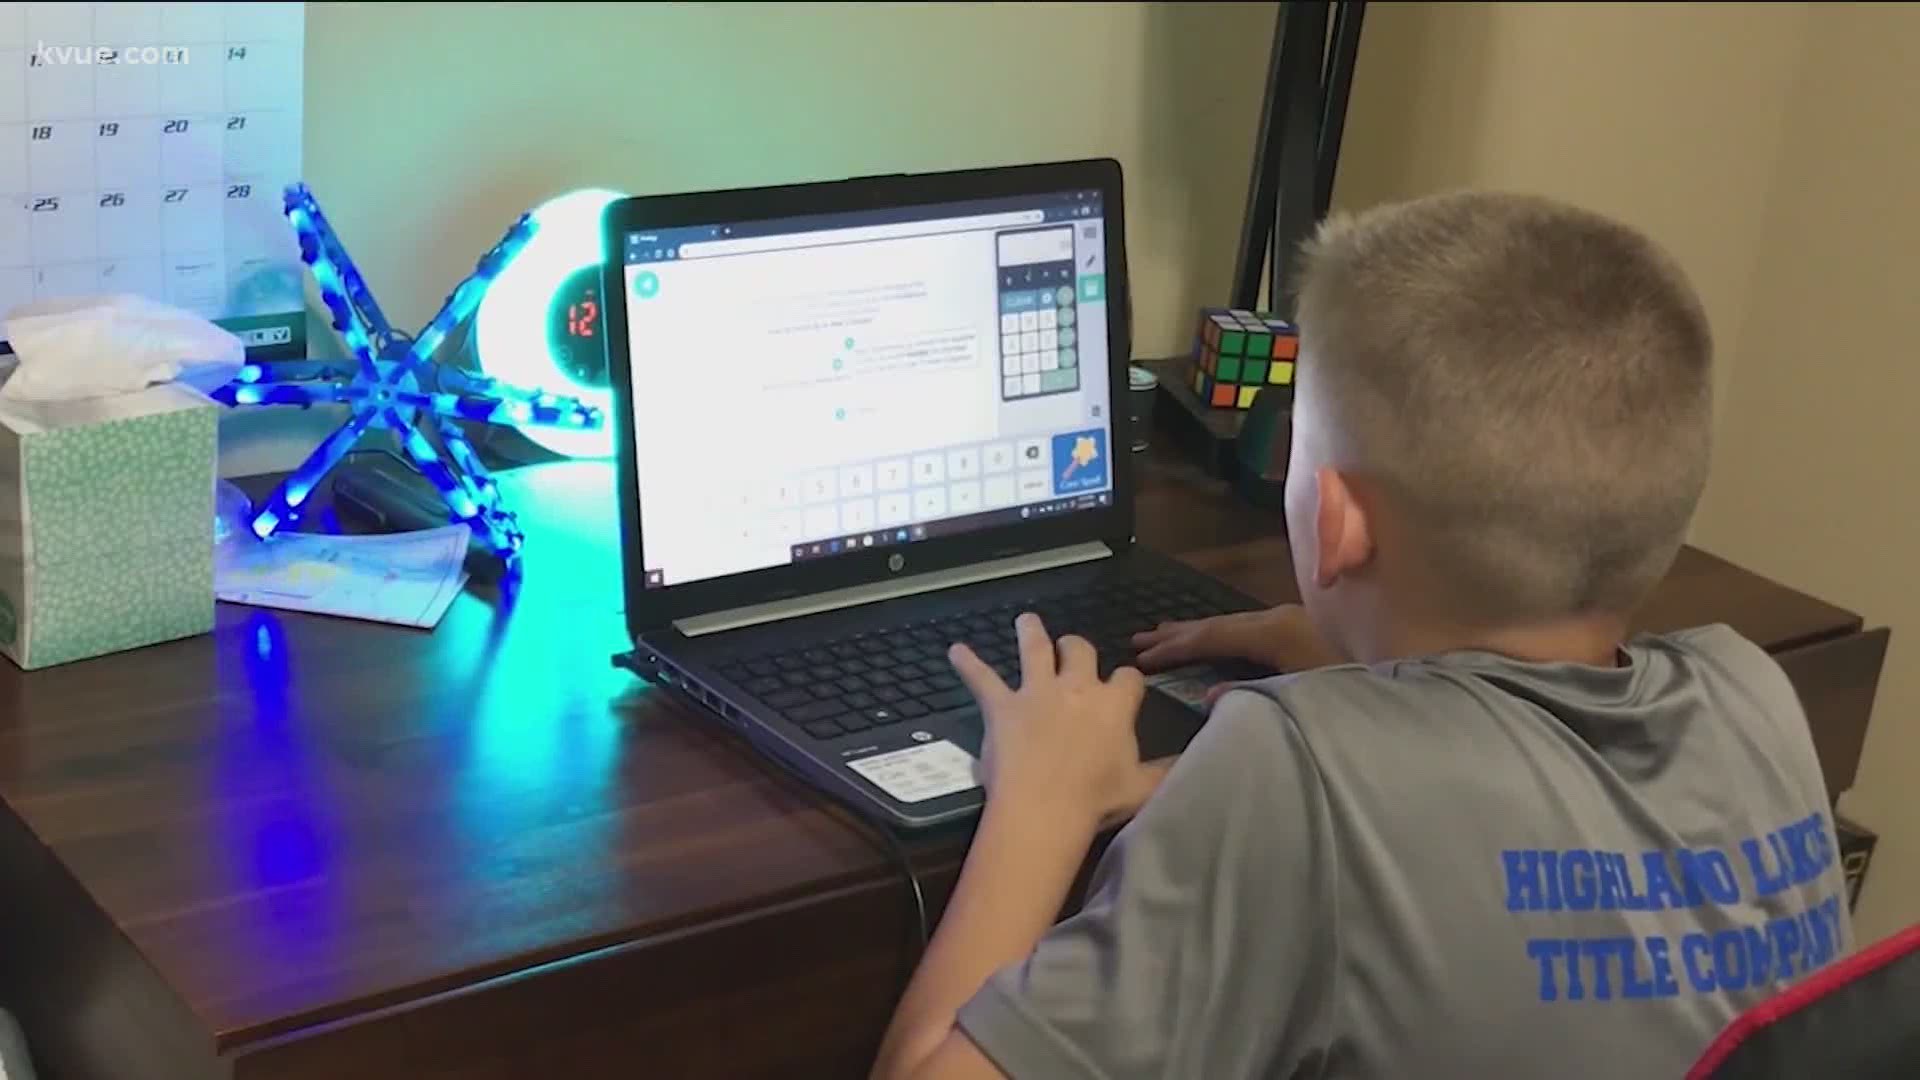 Hundreds of Central Texas students will log into virtual classrooms on Thursday. Mari Salazar tells us what parents and kids can expect for the remote first day.